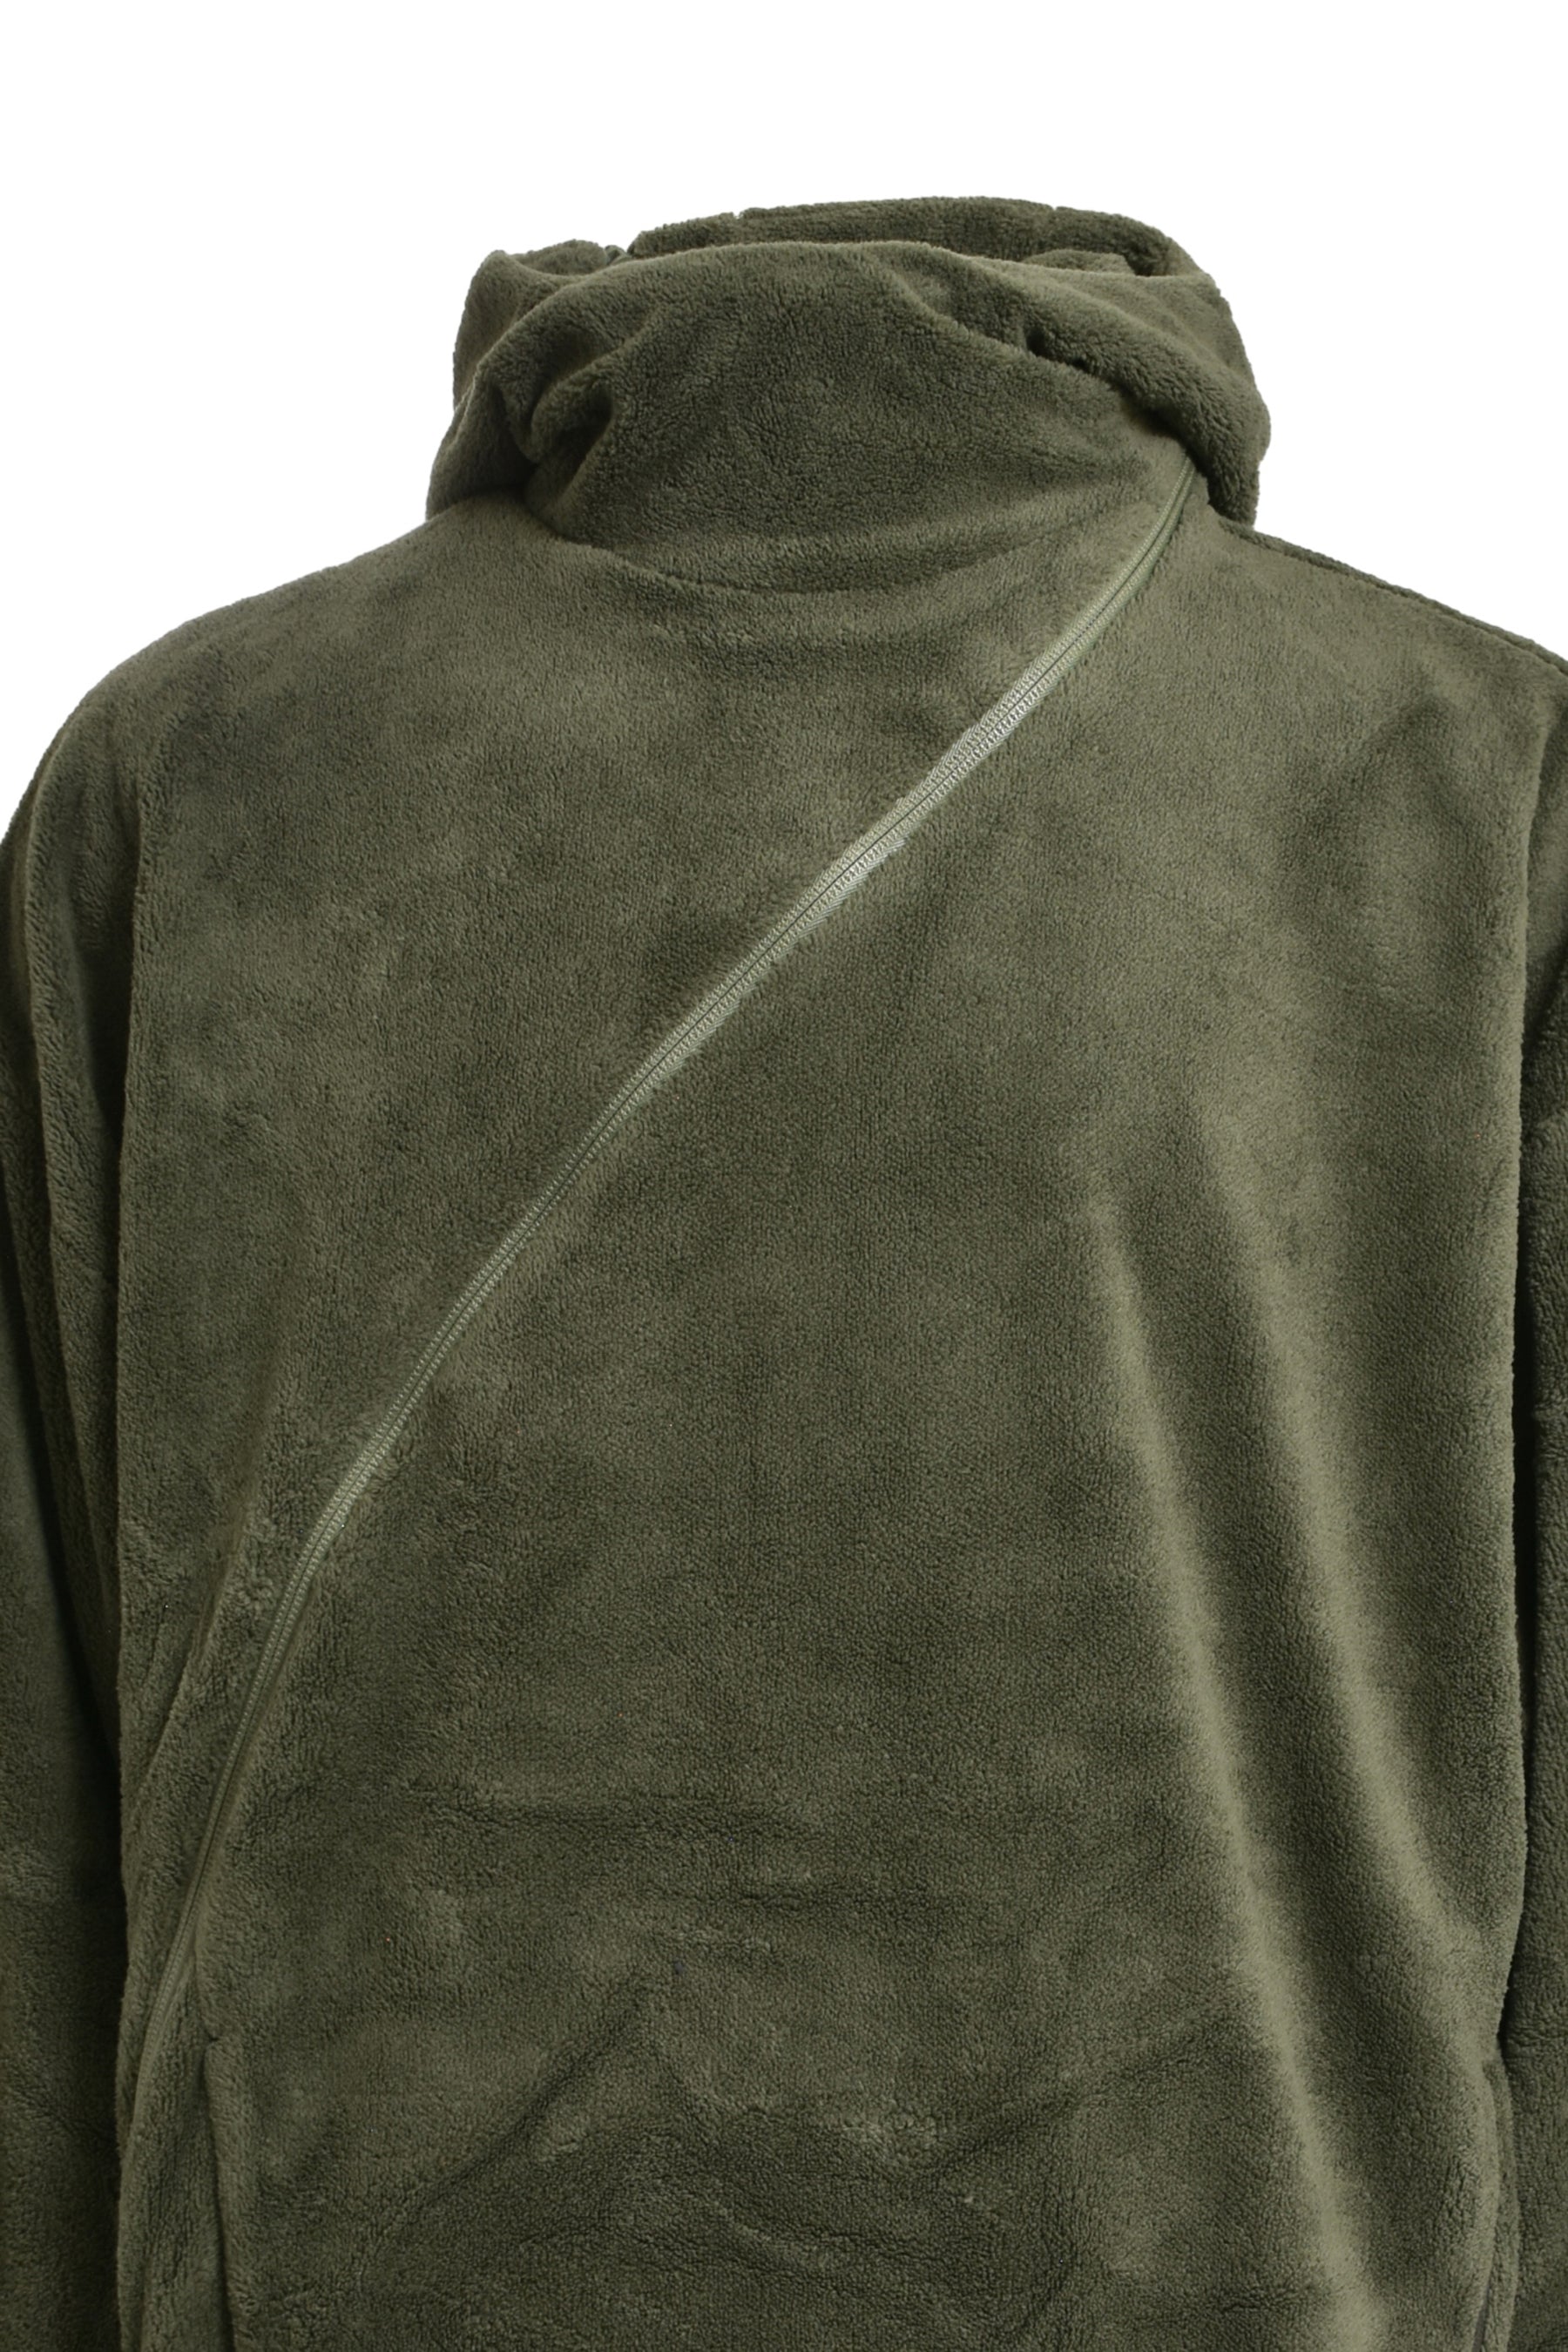 POST ARCHIVE FACTION (PAF) 5.1 HOODIE CENTER / OLIVE GRN